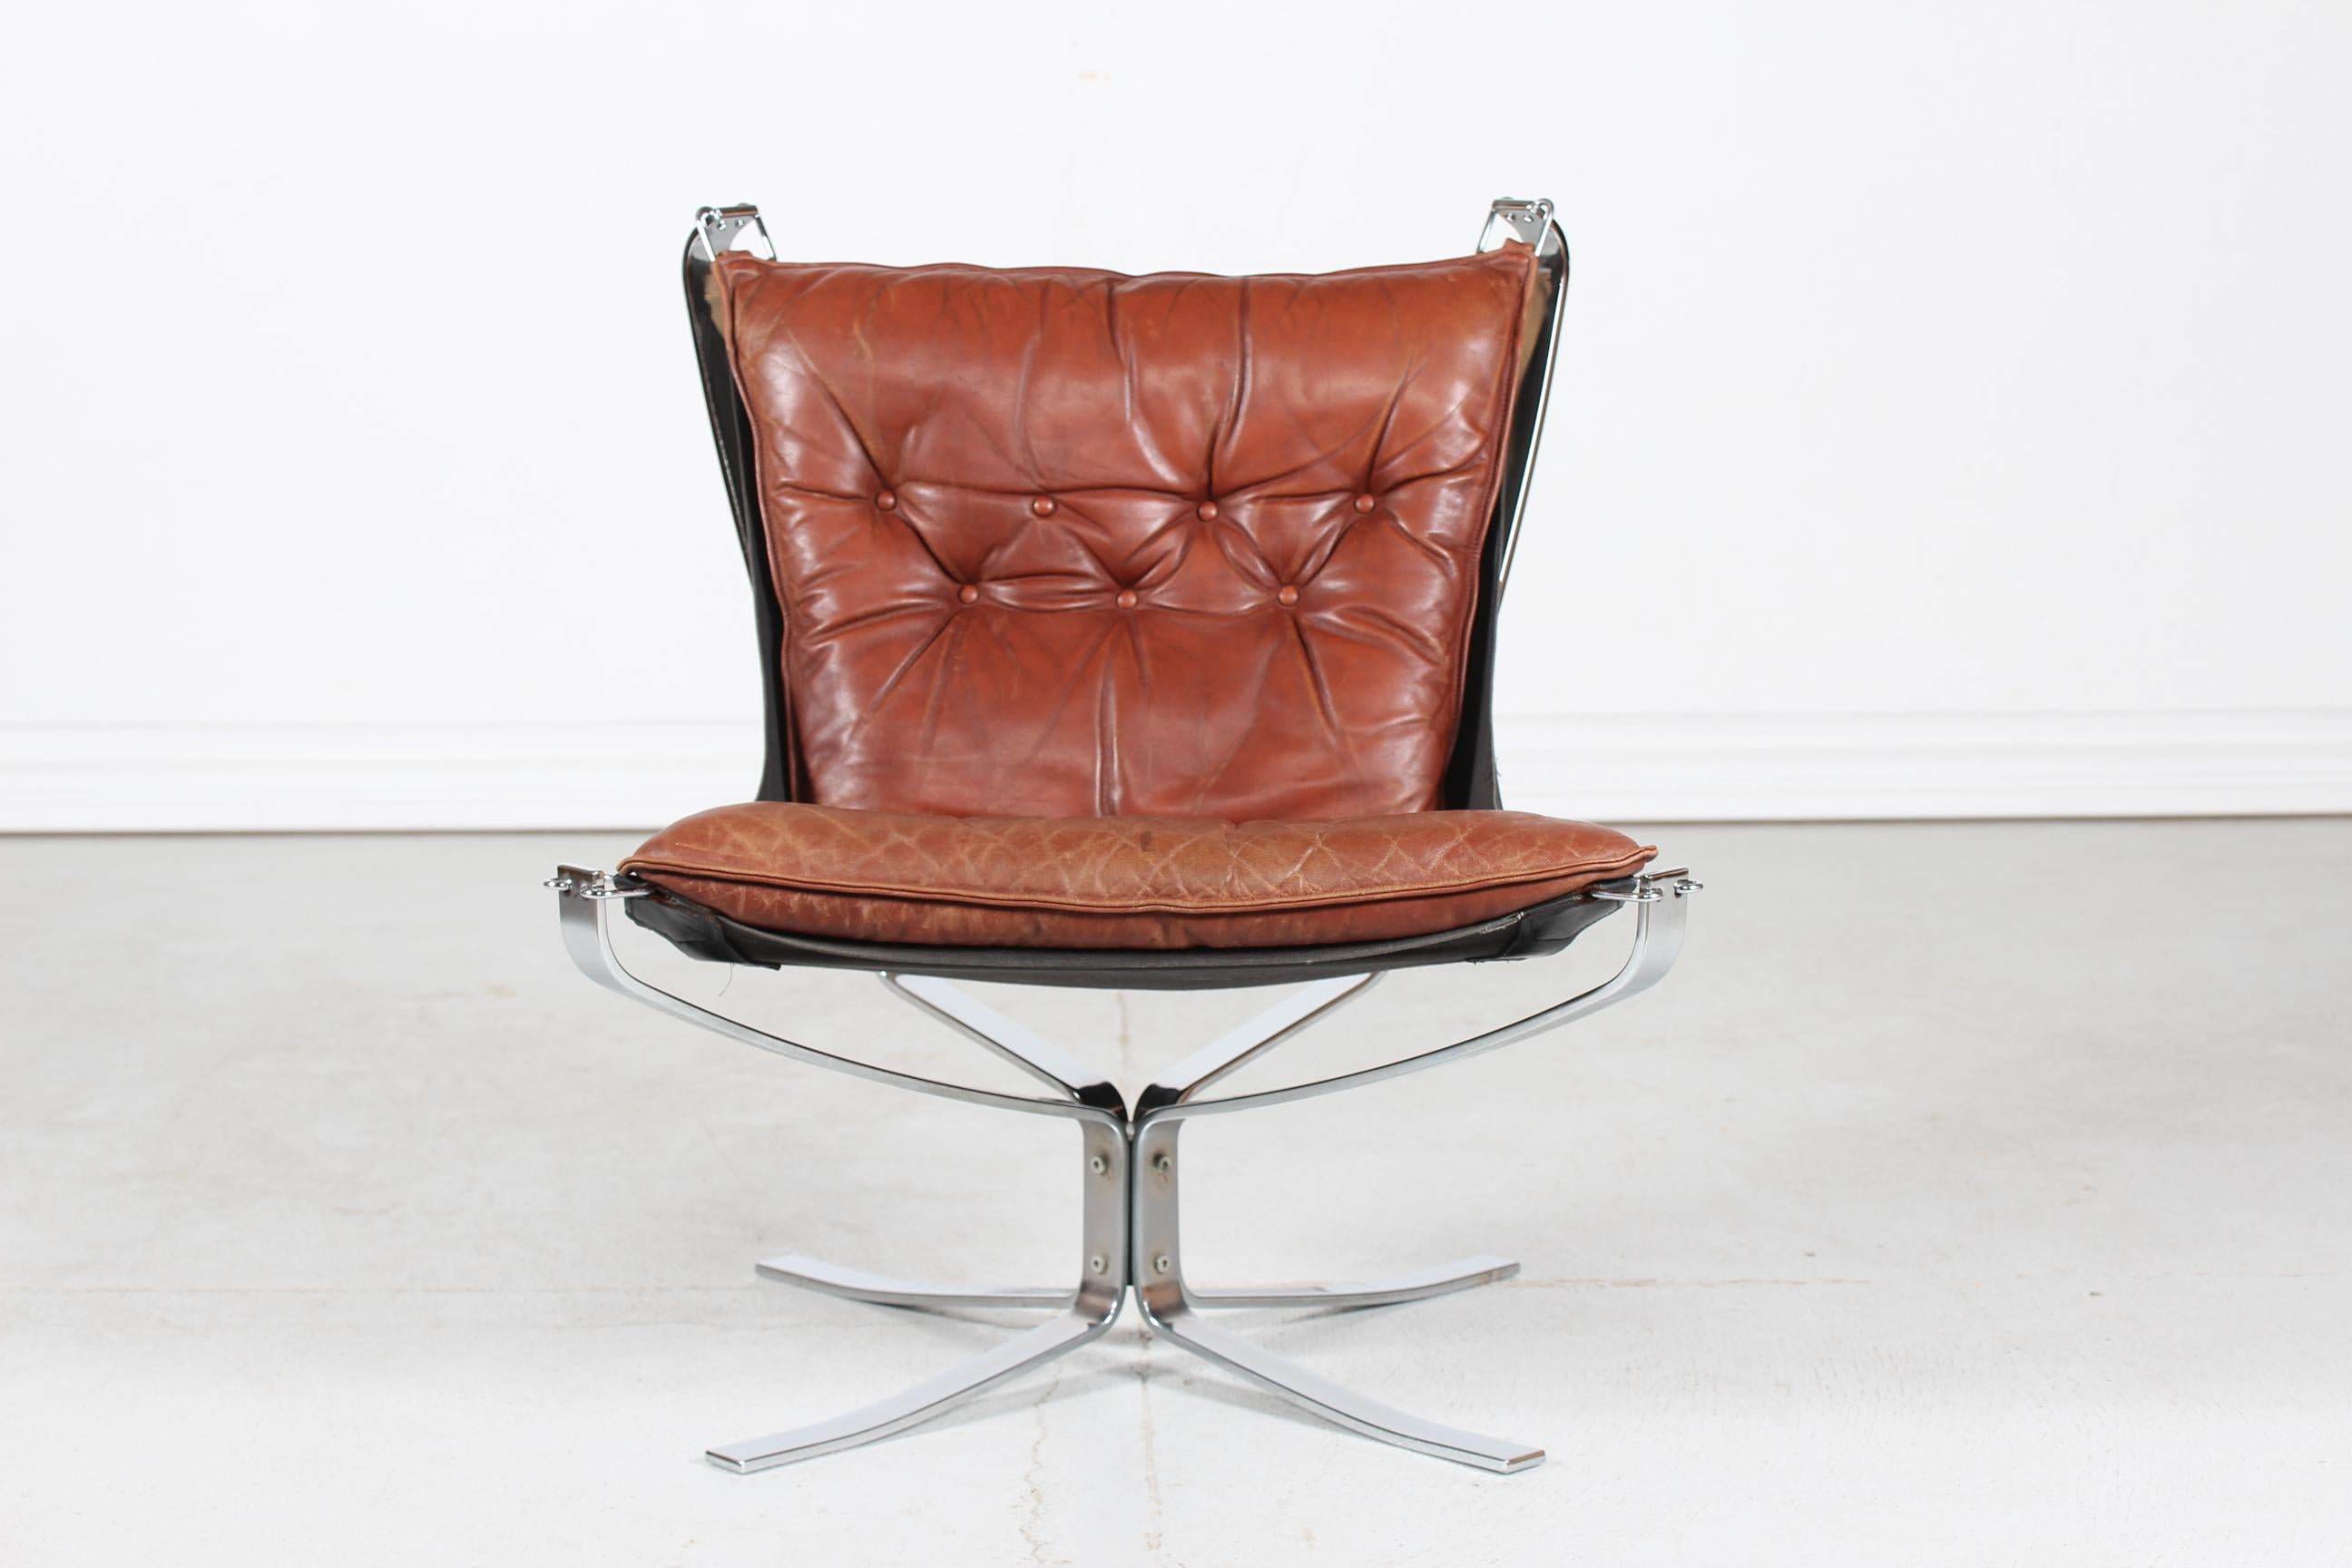 A Falcon easy chair/ lounge chair designed by Sigurd Ressell. Manufactured by Vatne Møbler Norway in 1970s
The chair has a chromium-plated steel frame stretched with black fabric. The cushion is upholstered with genuine dark cognac colored